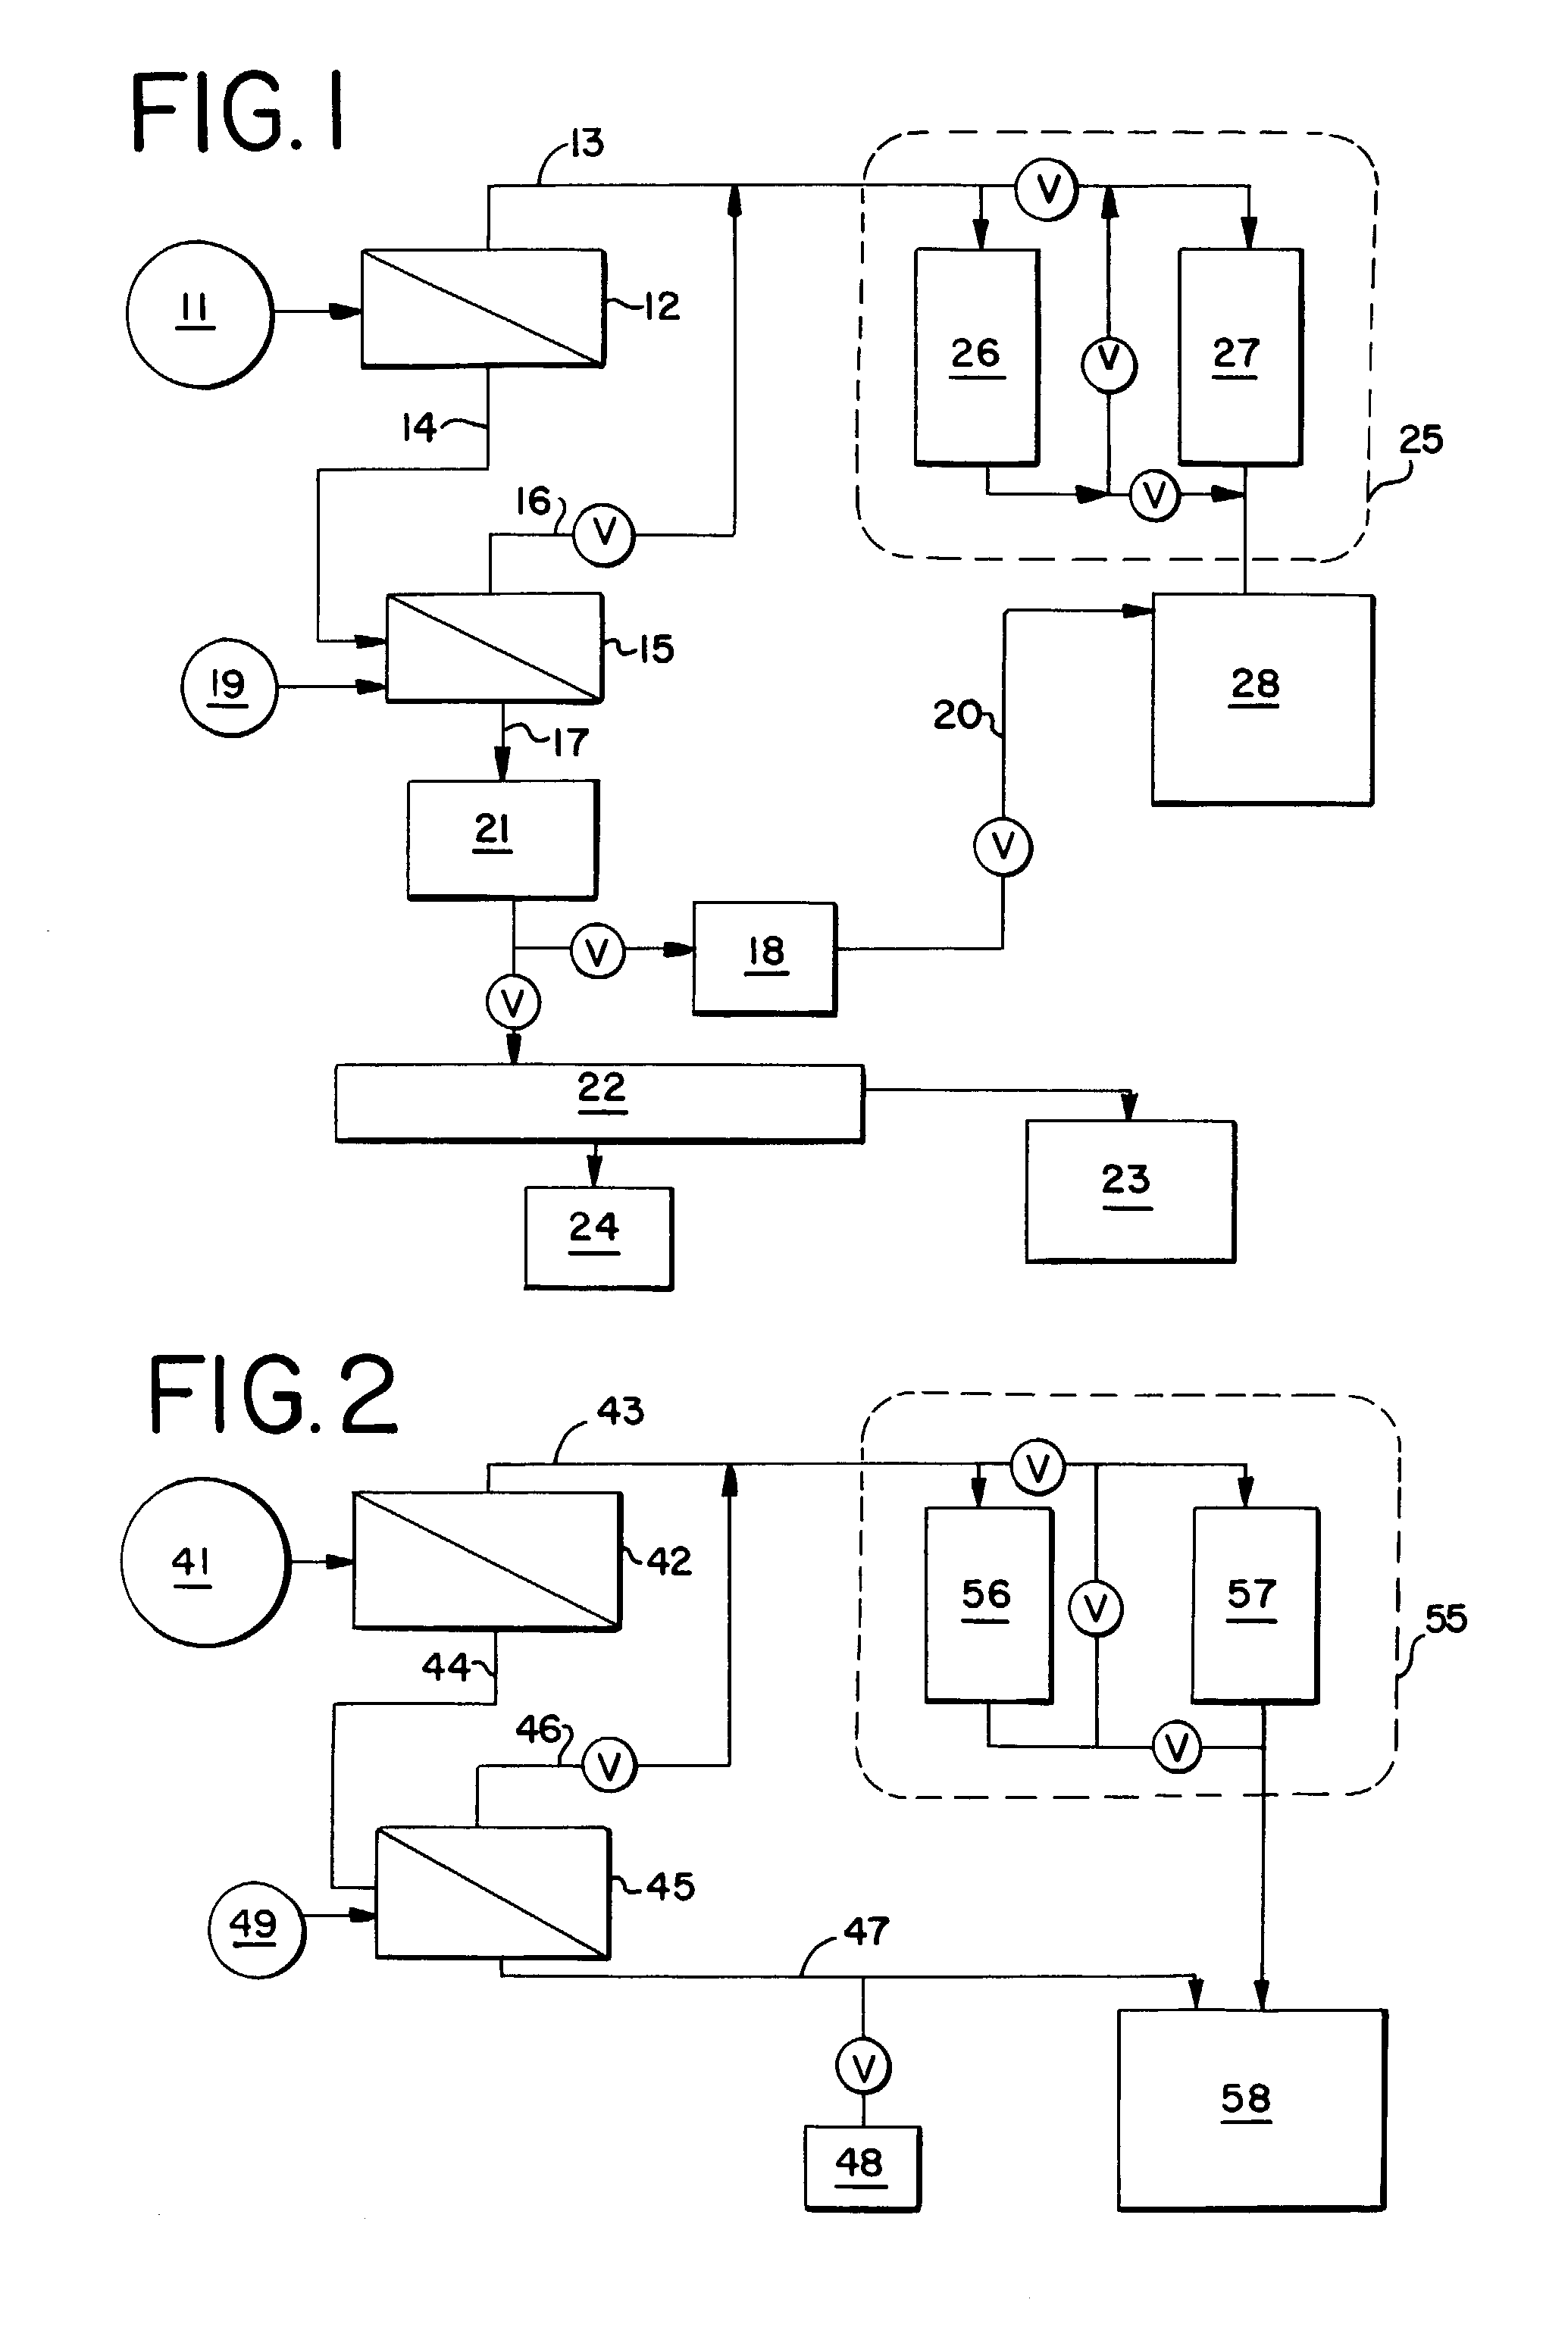 Juice processing incorporating resin treatment